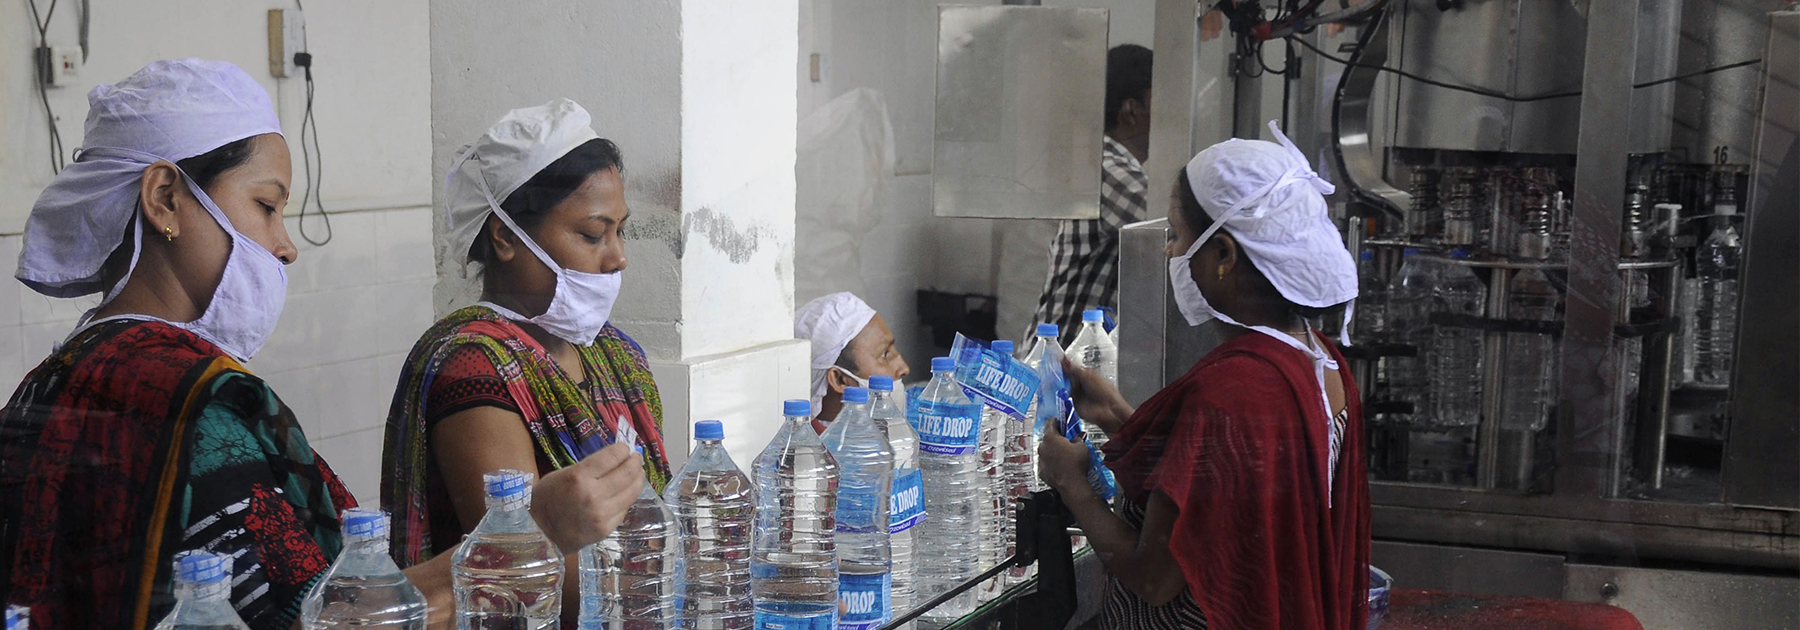 Workers add labels onto bottles of drinking water at a bottling unit on World Water Day in Agartala. (ARINDAM DEY/AFP/Getty Images)